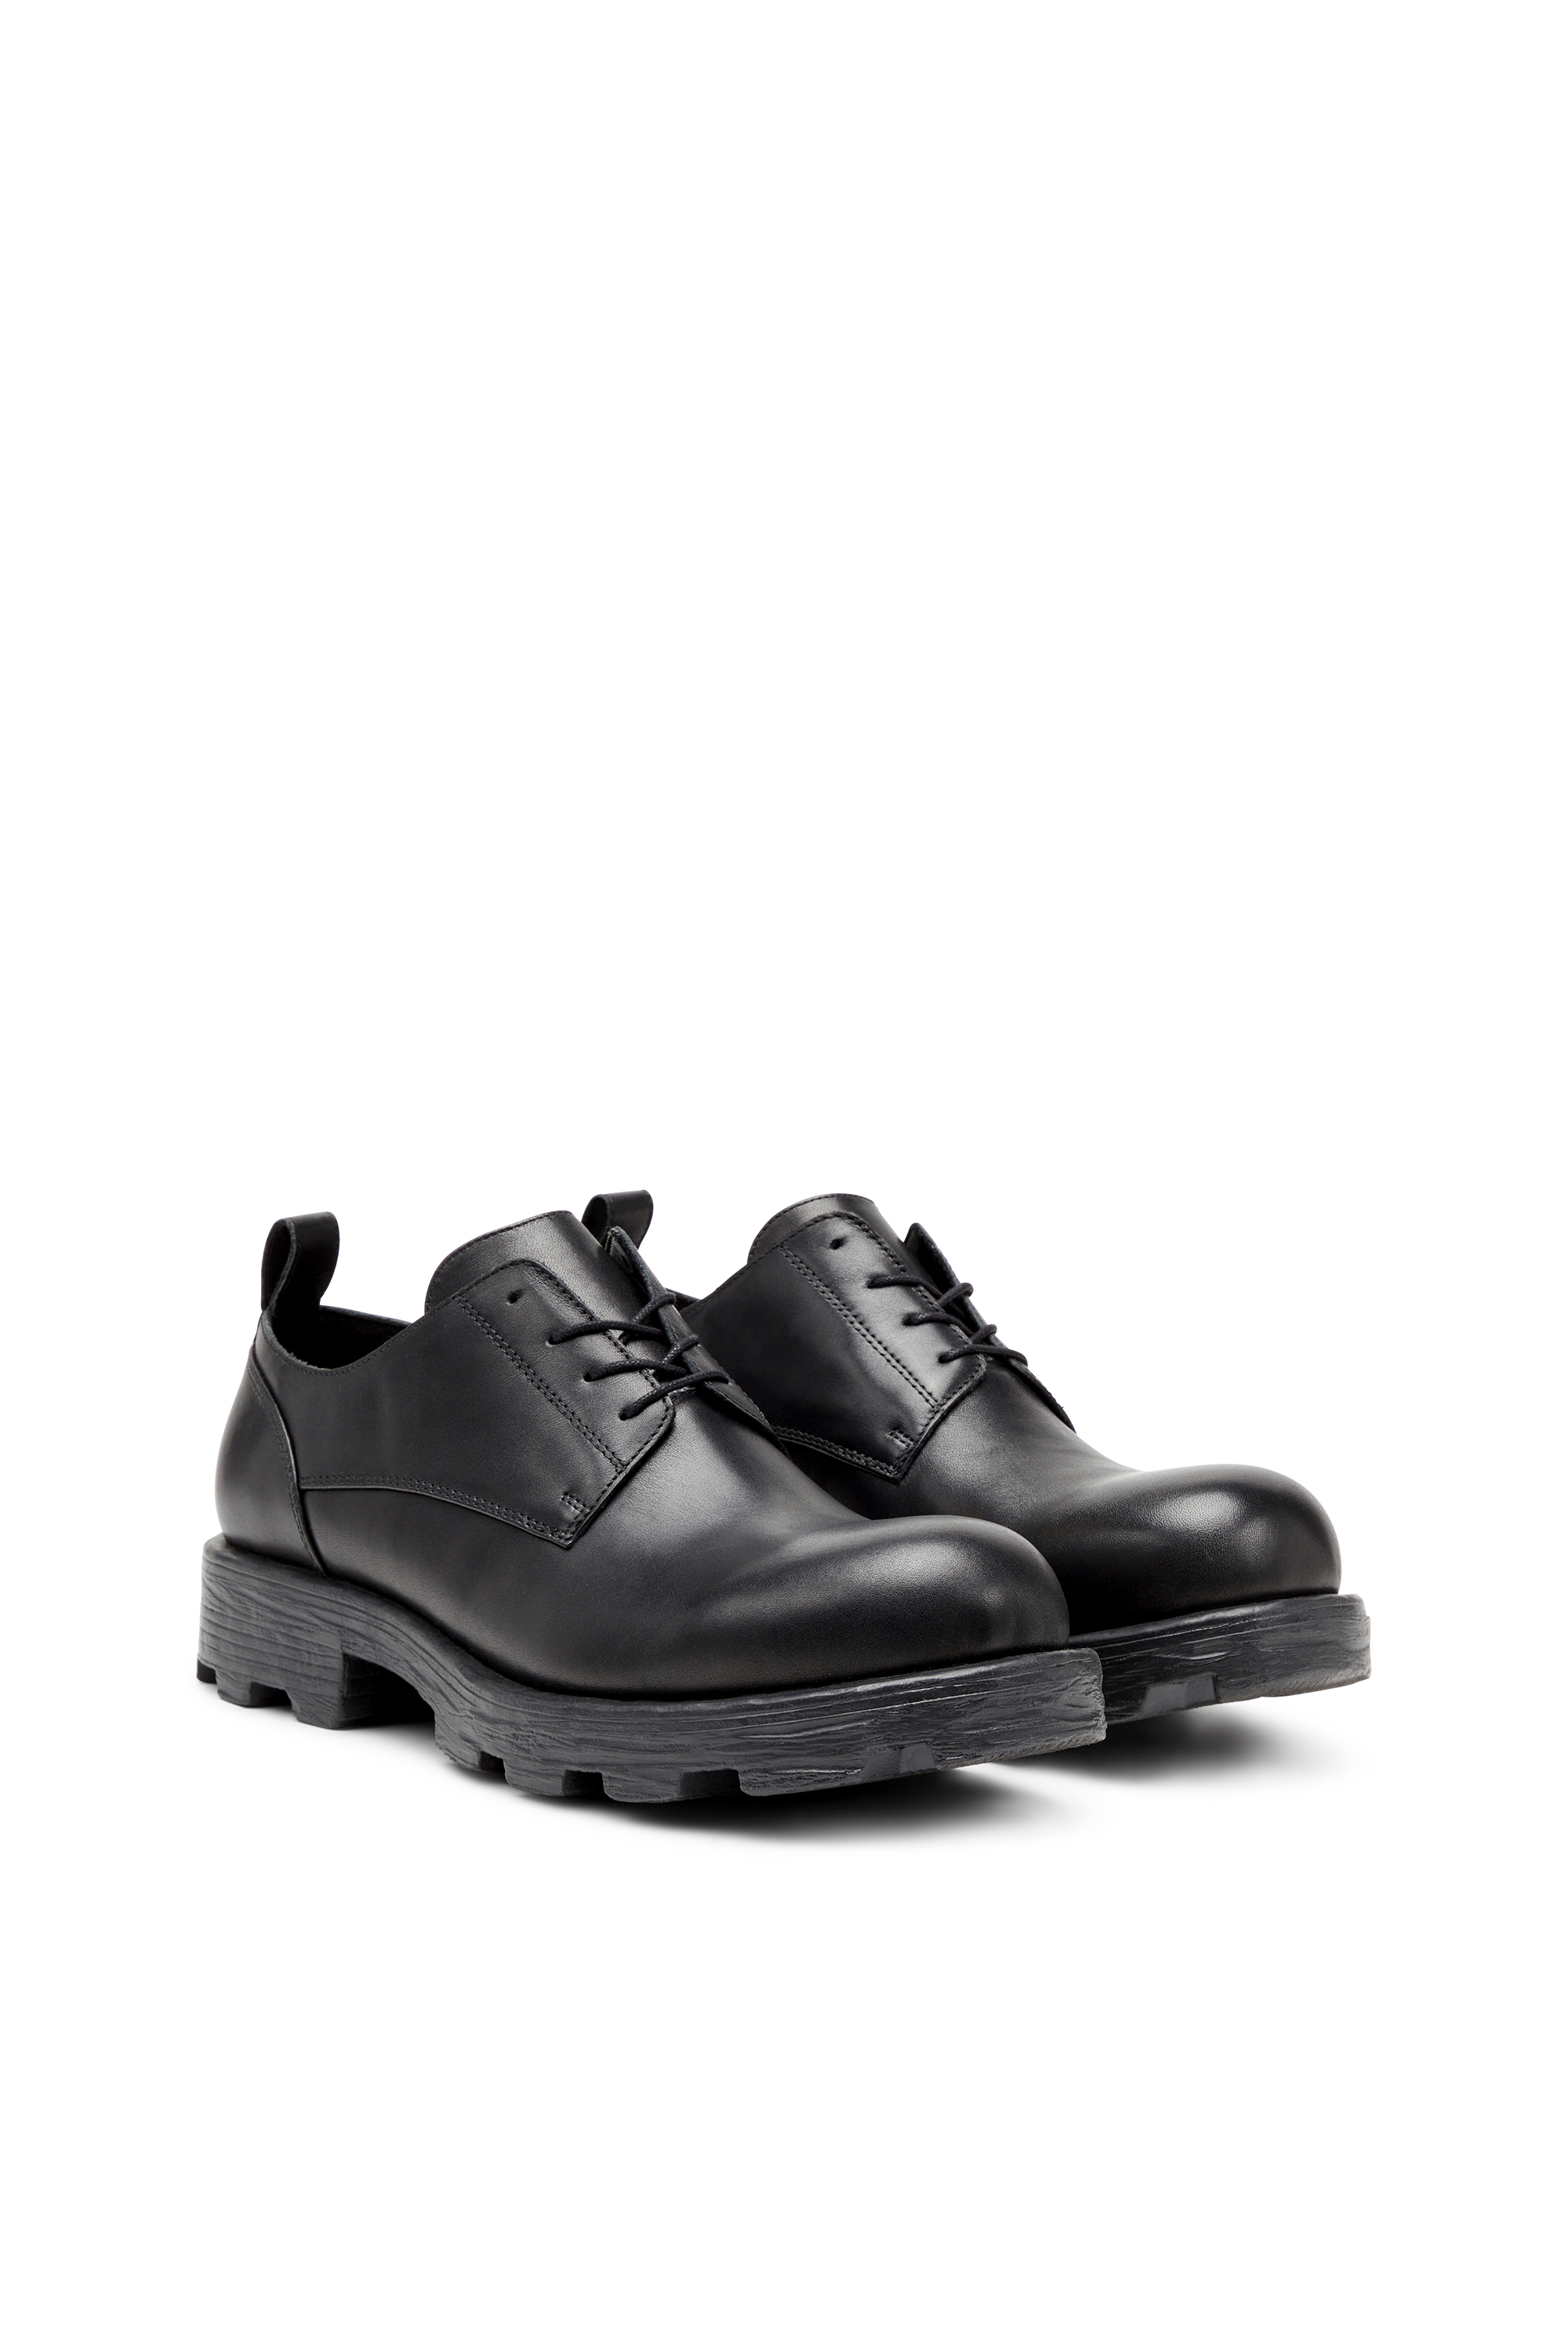 Diesel - D-HAMMER SH, Male D-Hammer-Derby shoes in textured leather in Black - Image 2